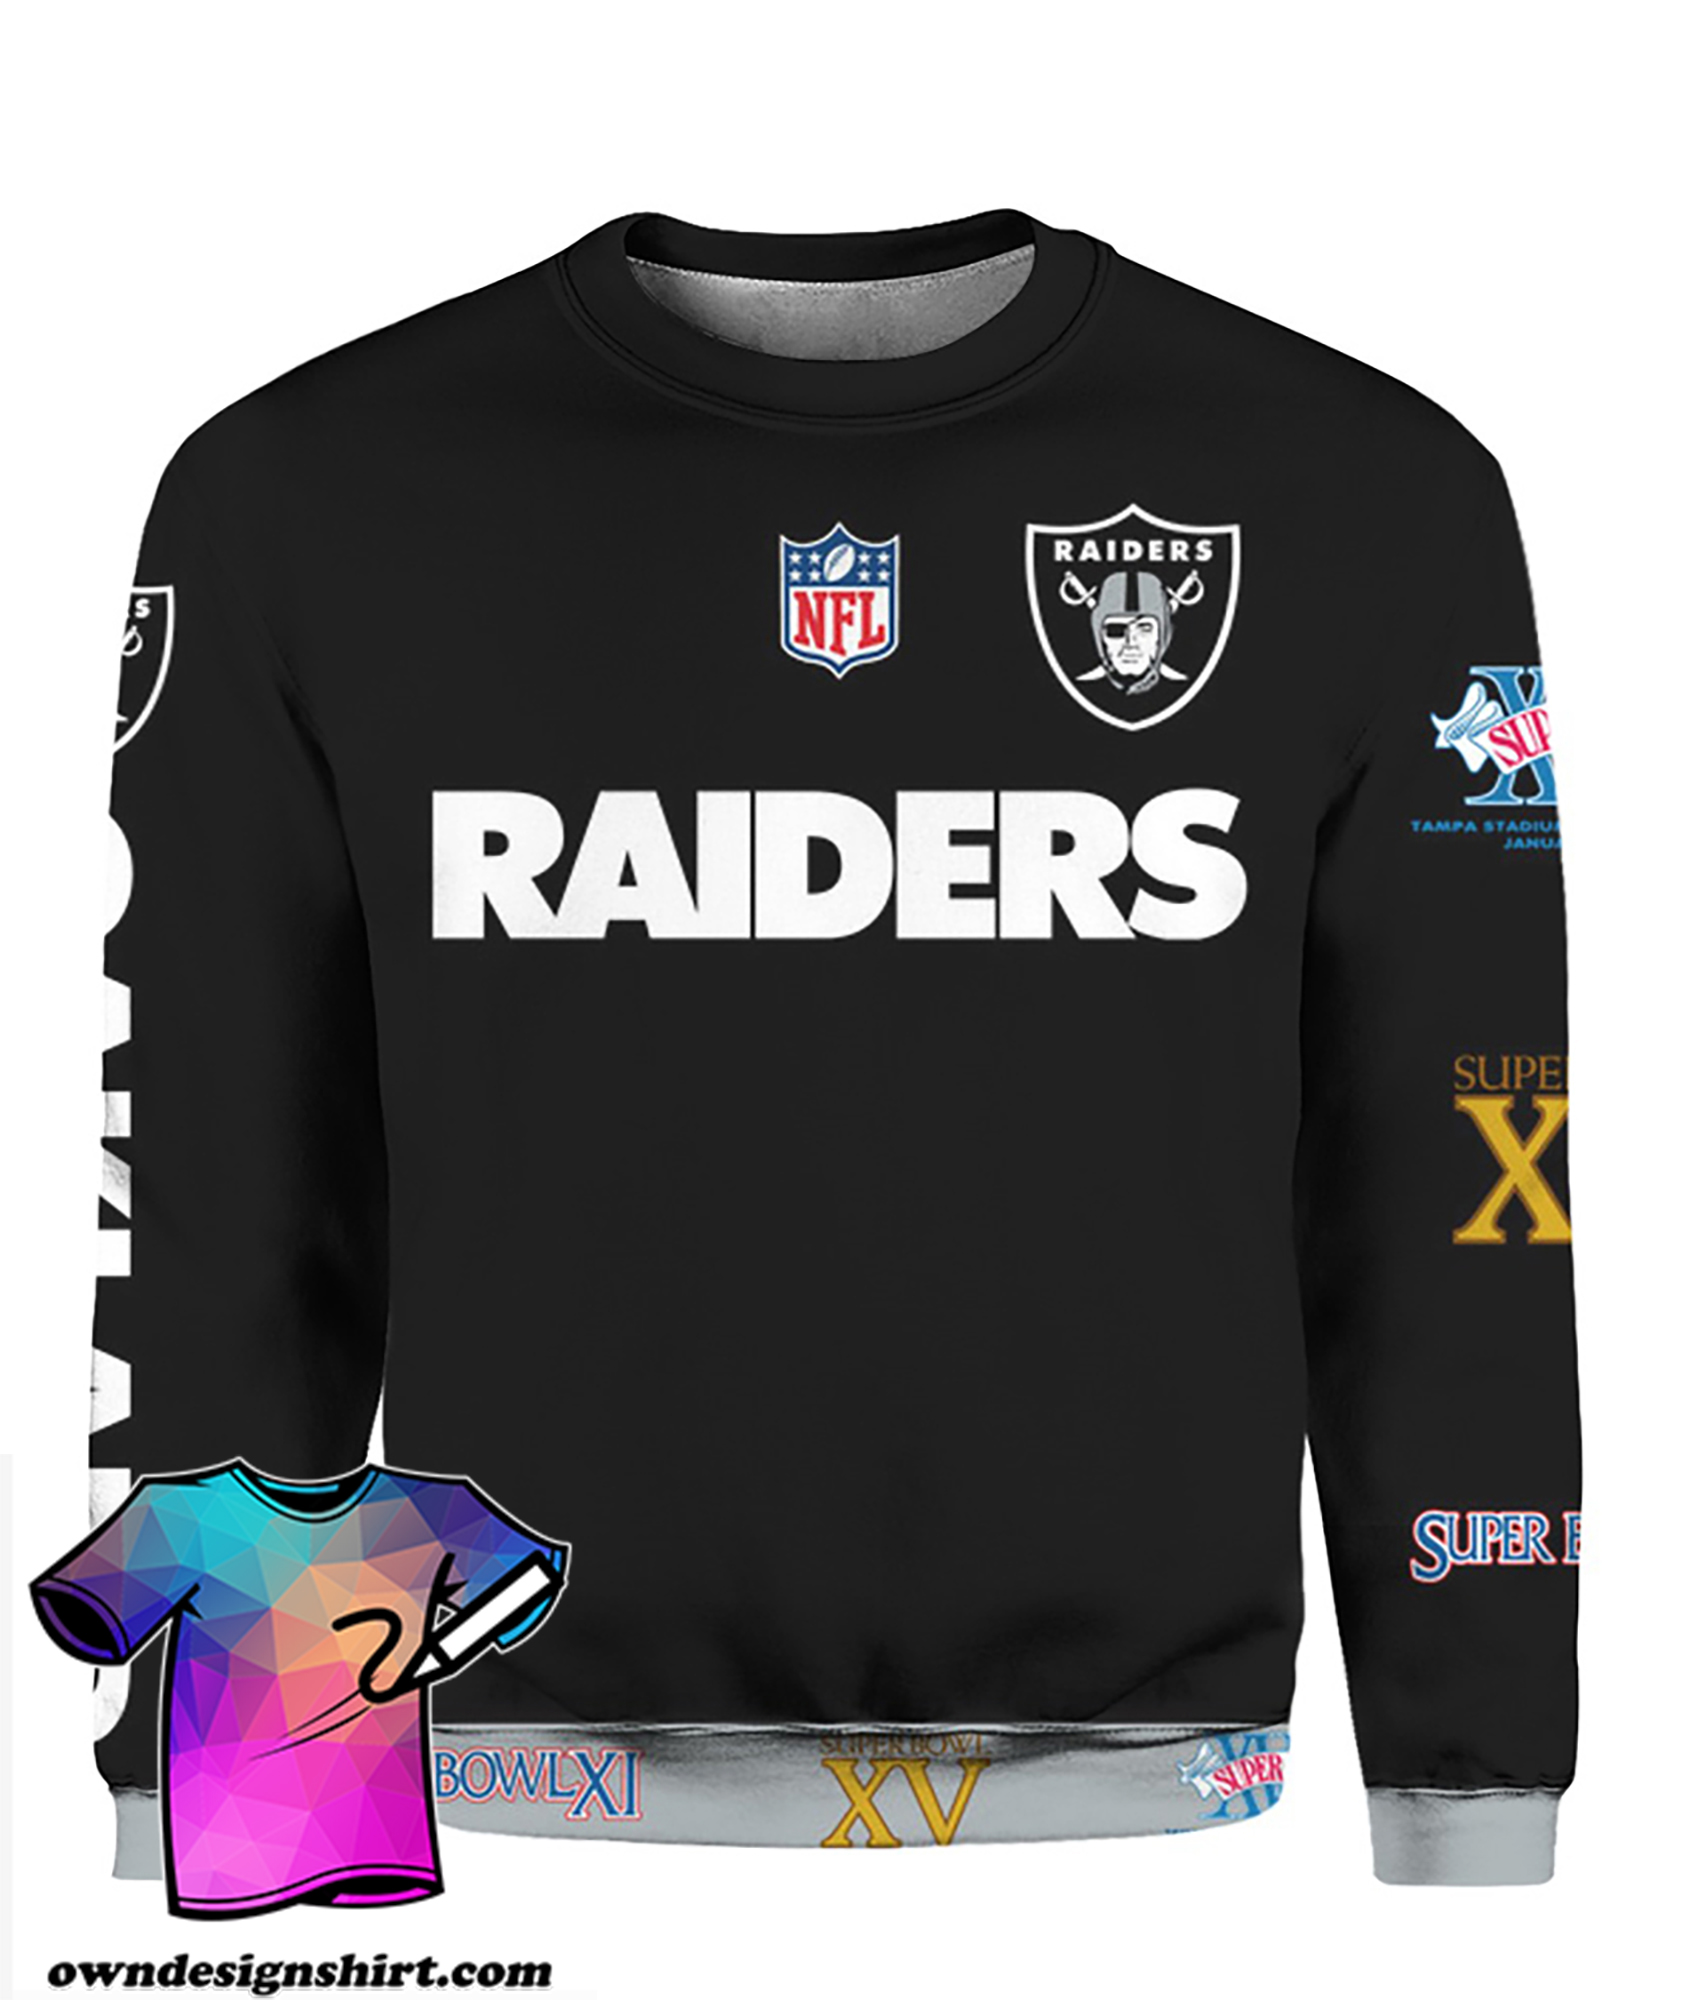 Stand for the flag kneel for the cross oakland raiders all over print shirt